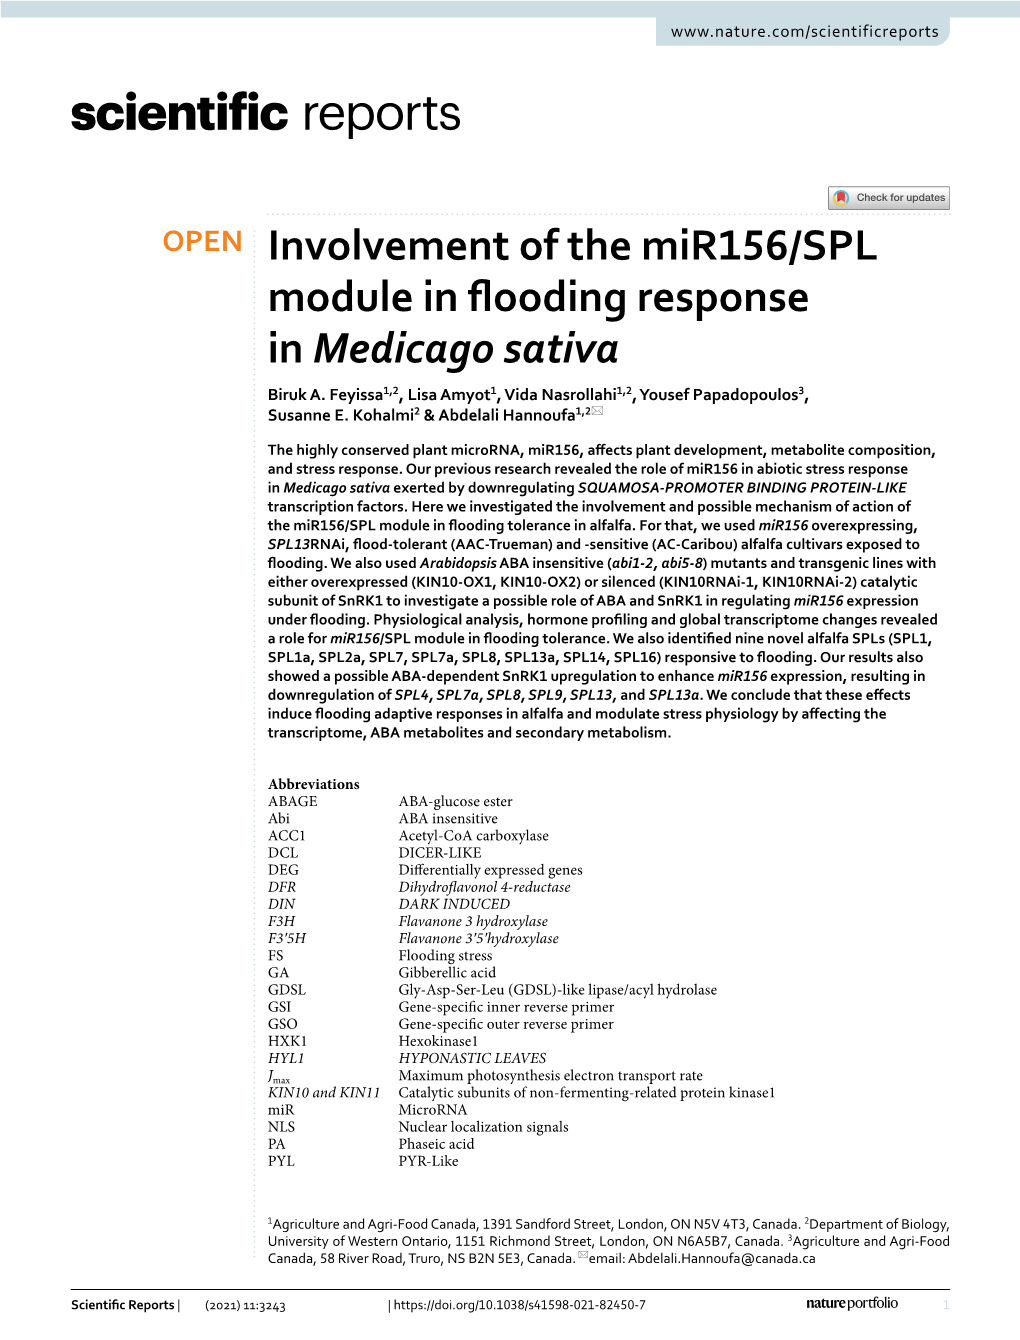 Involvement of the Mir156/SPL Module in Flooding Response In